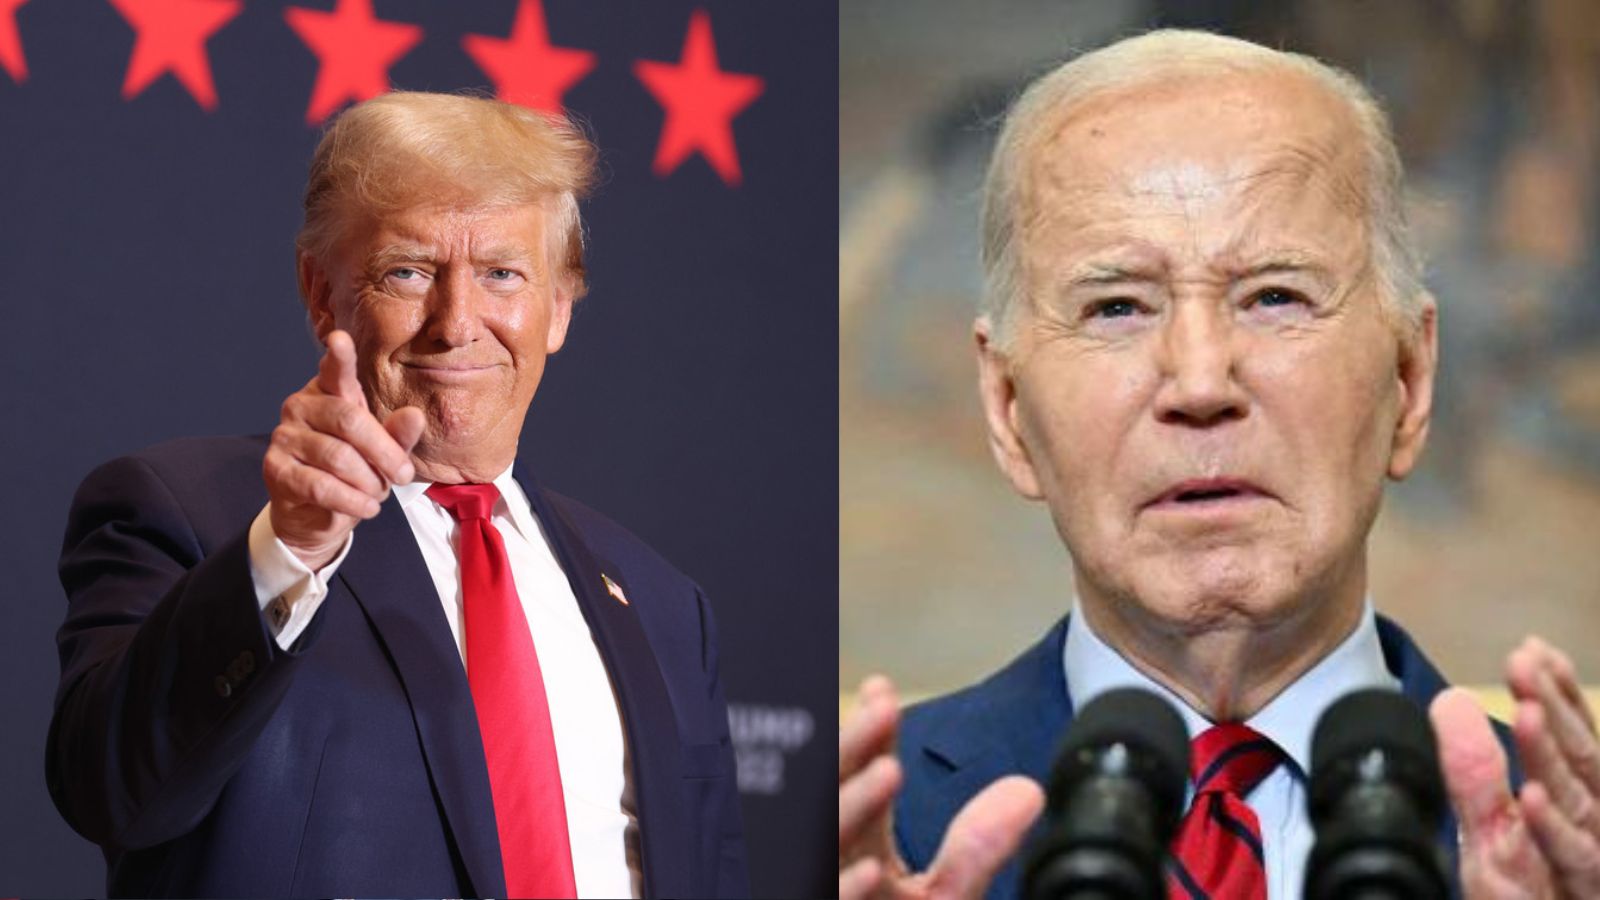 My Message to President Trump: The Debates are a Trap. Something is Wrong. Drug Test Biden.